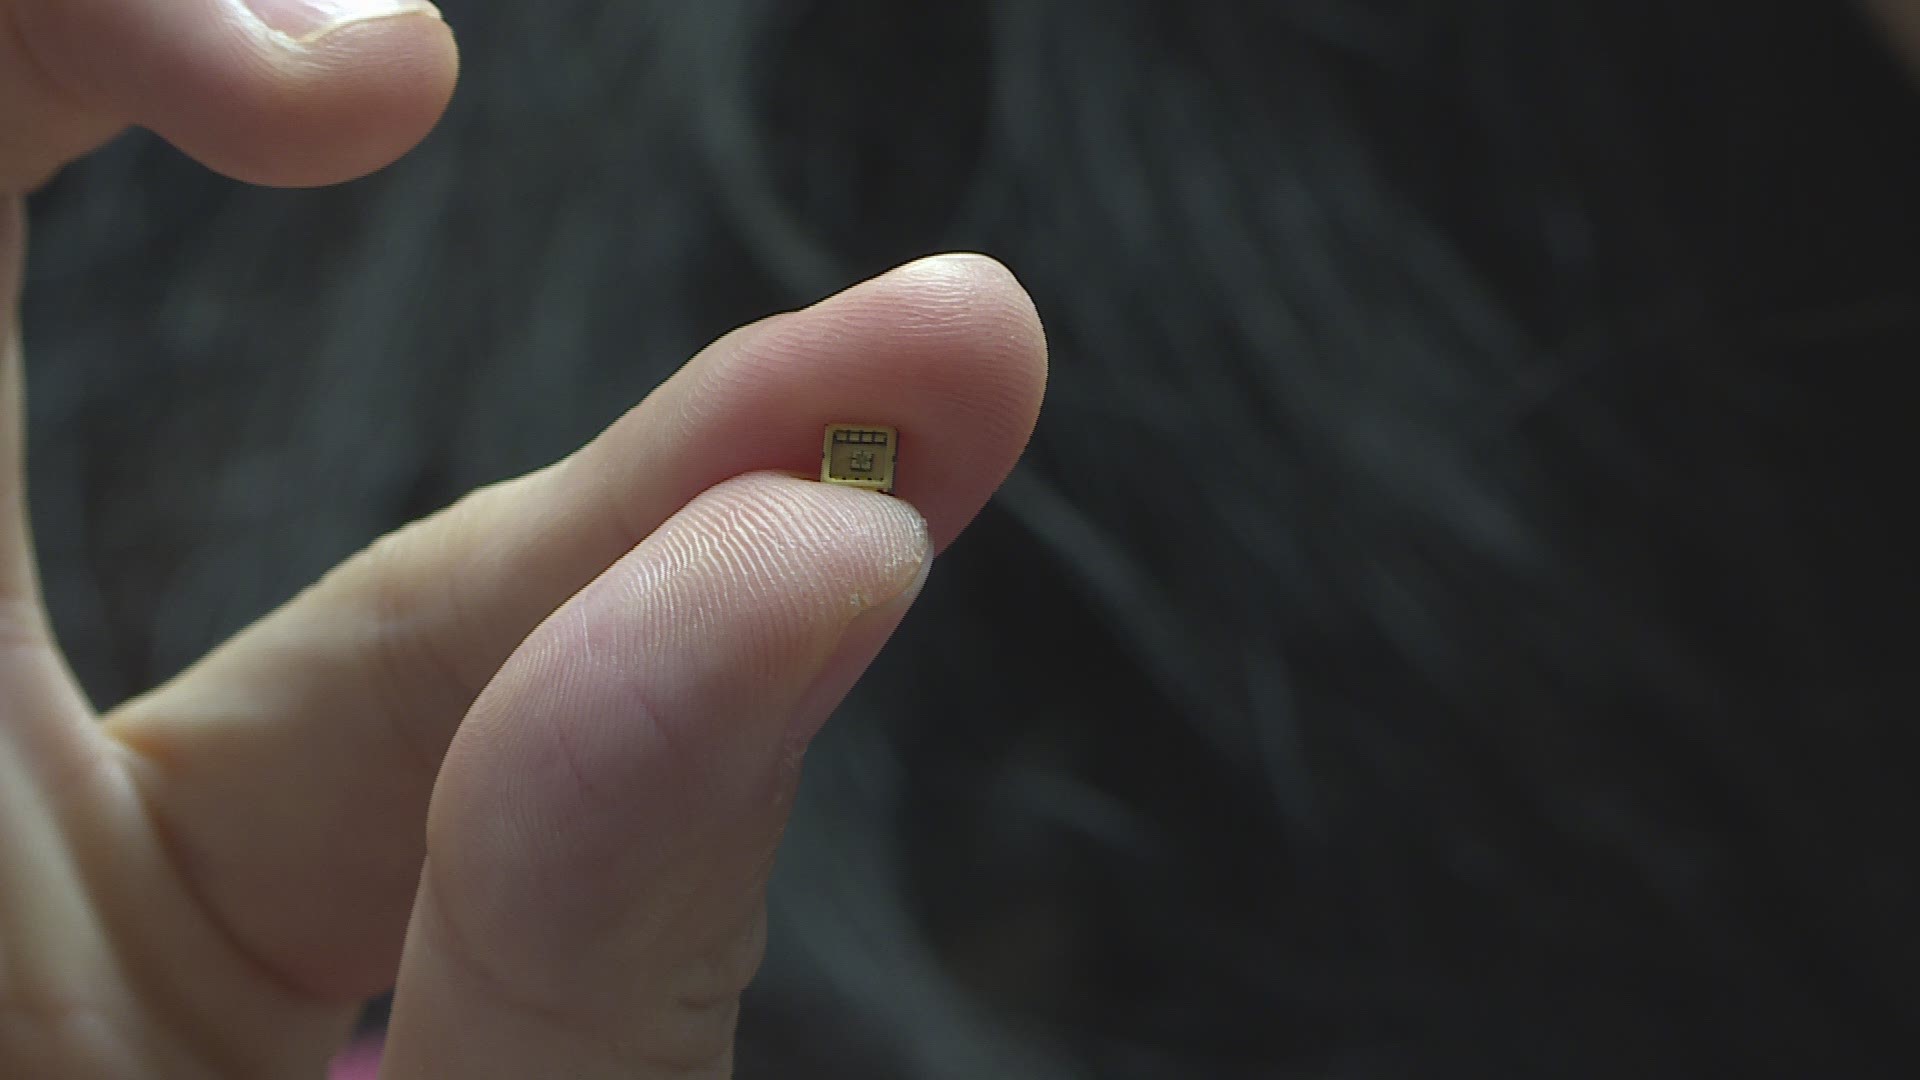 Described as wearable nanotechnology, these sensors would allow users to track exercises and fat-burning in real-time.